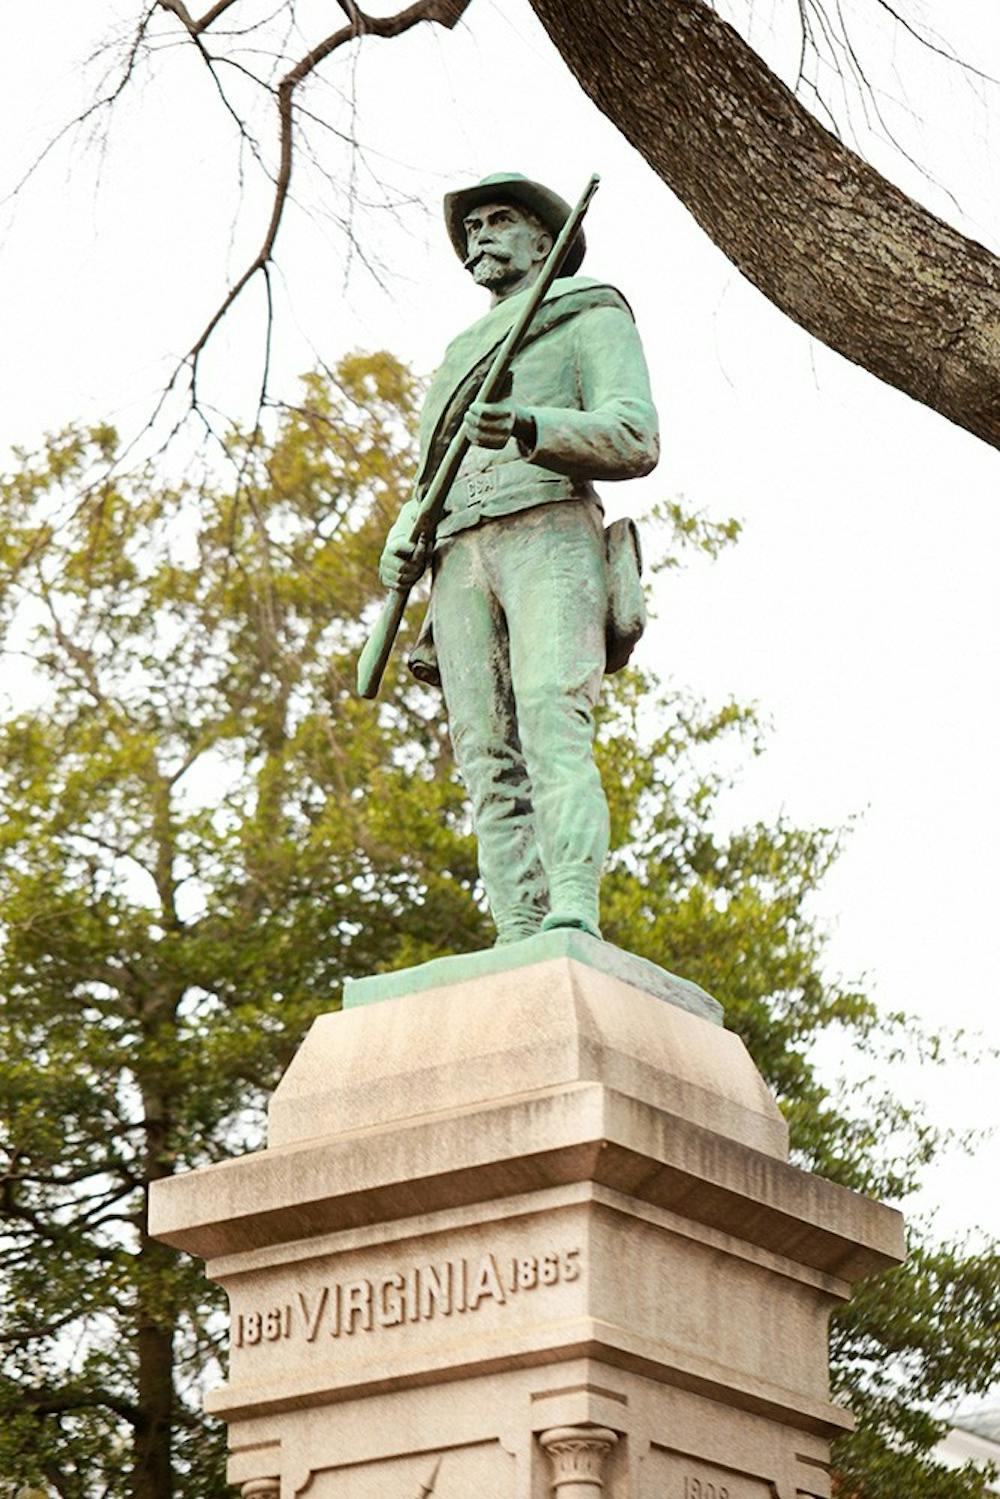 State law currently limits the authority of local governments to remove war-related monuments.&nbsp;